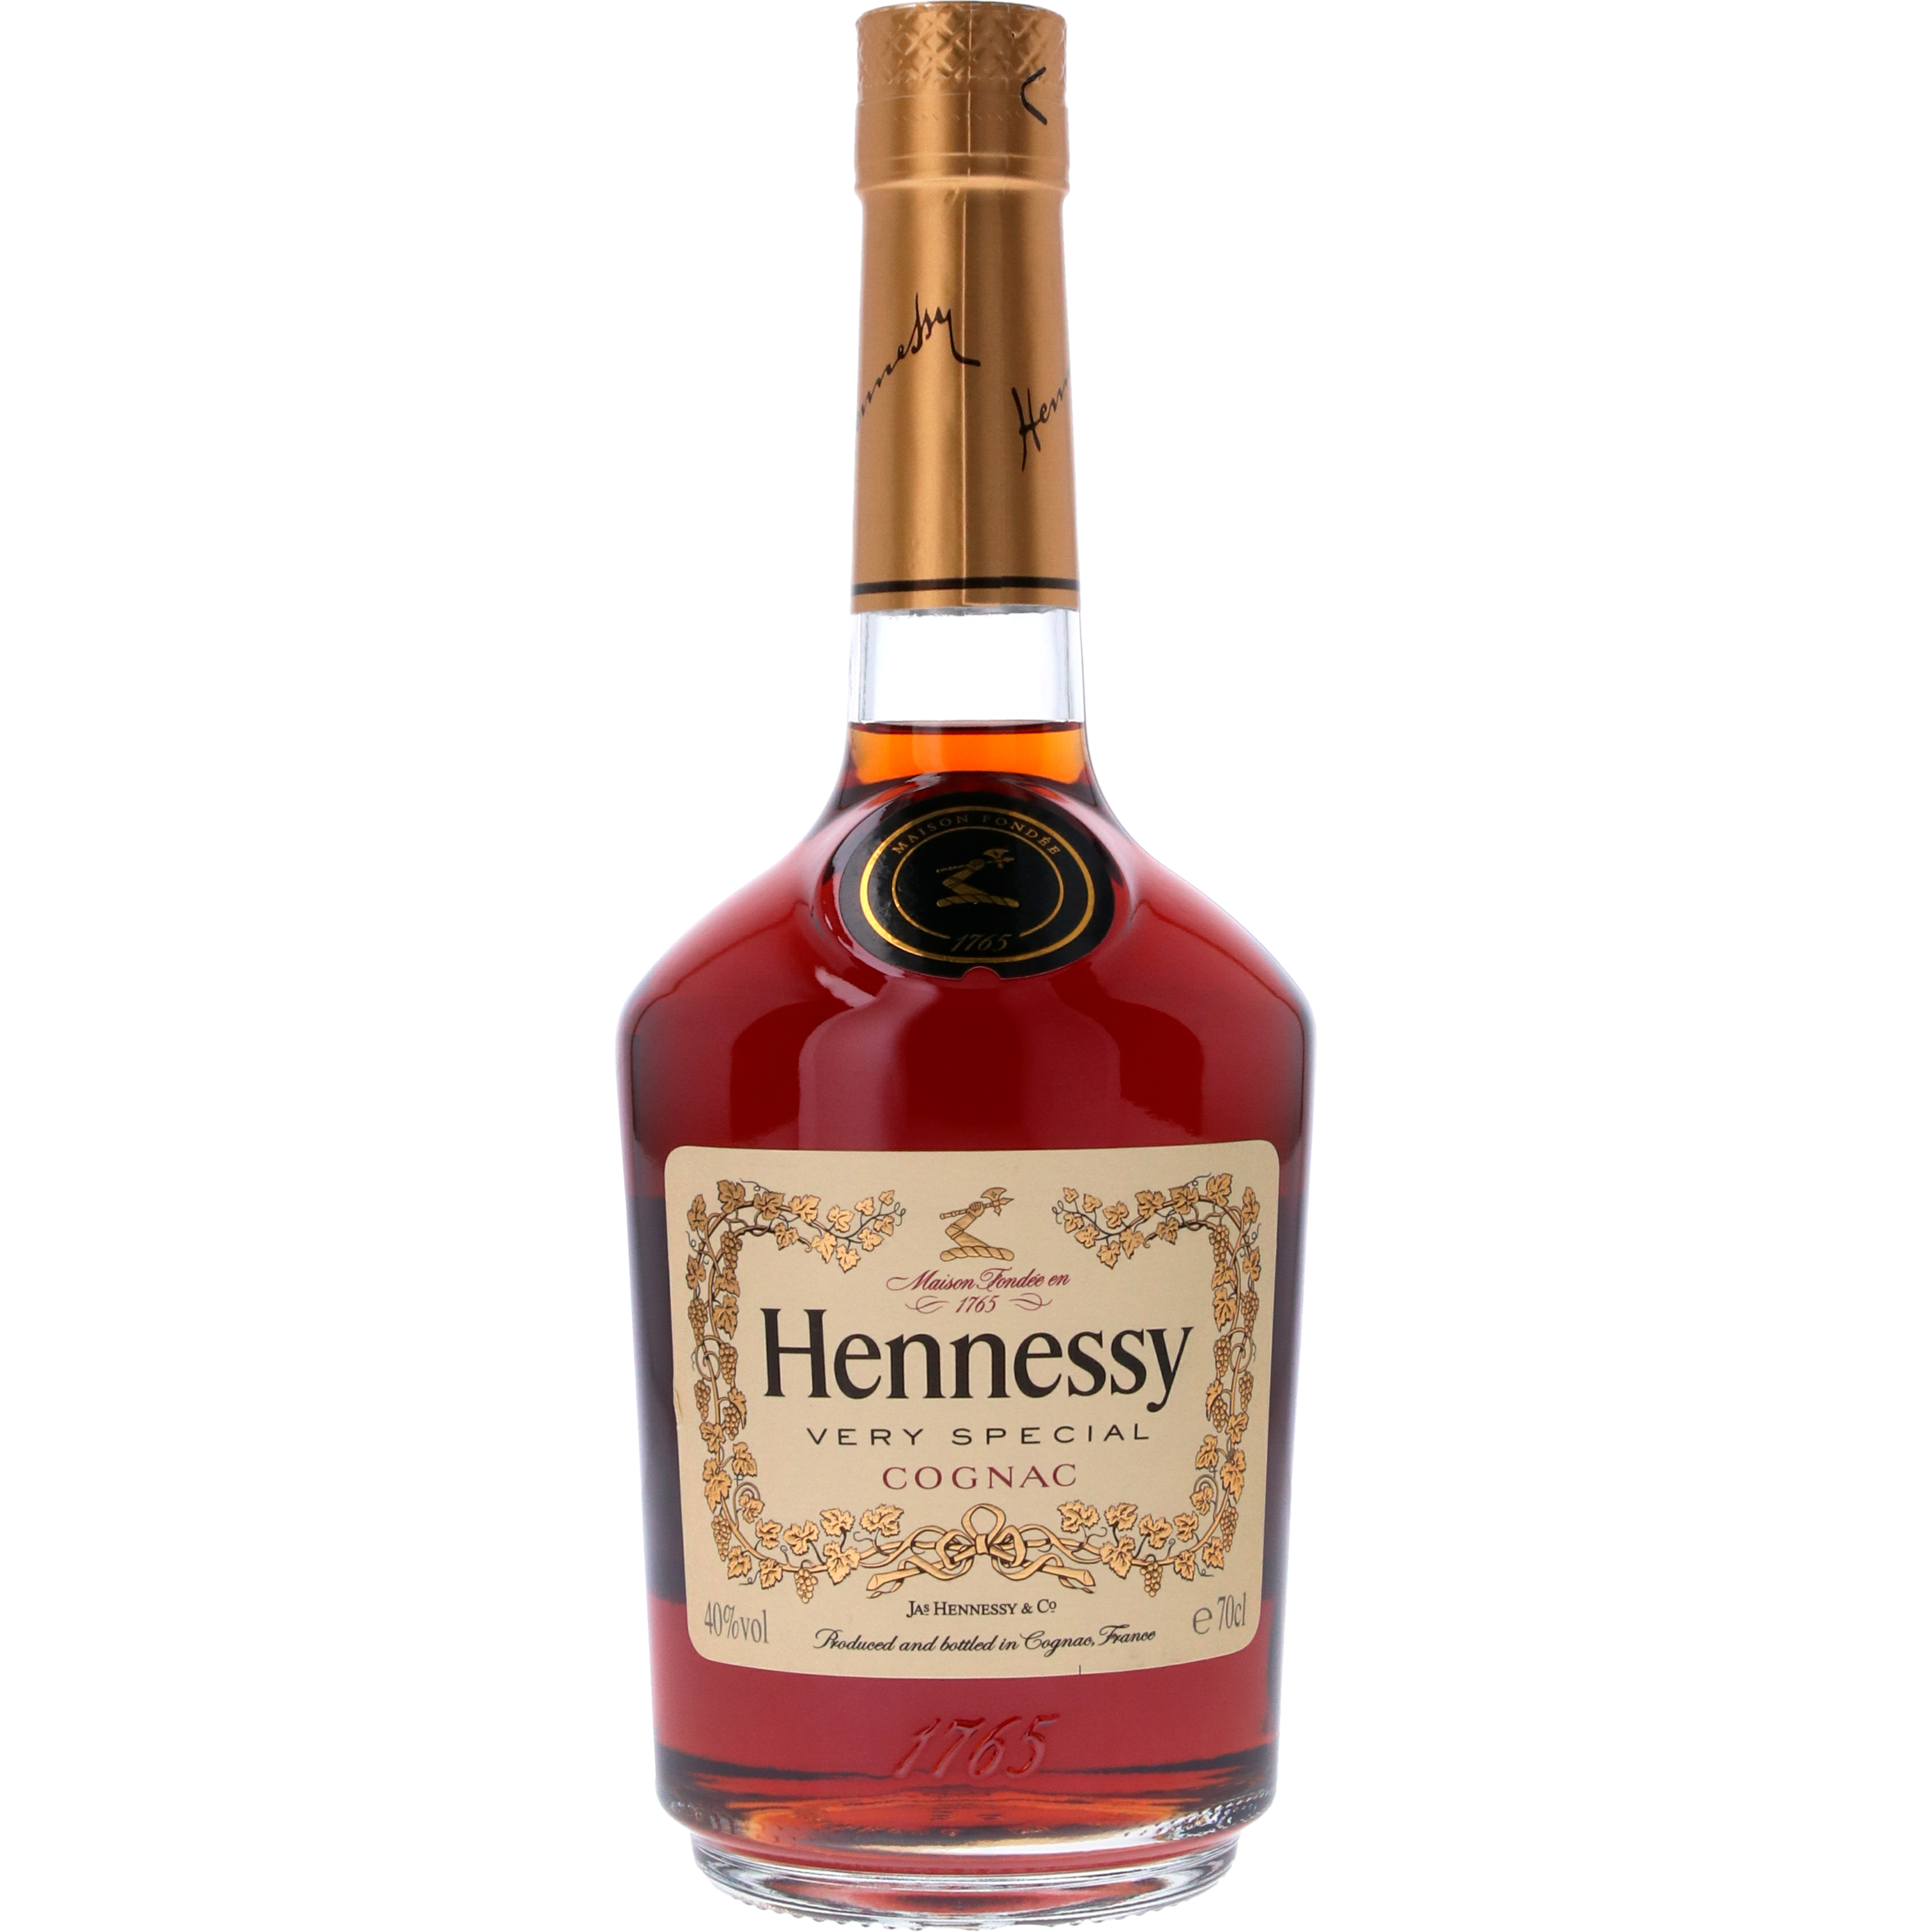 48145 Hennessy very special cognac 1x0,70 ltr